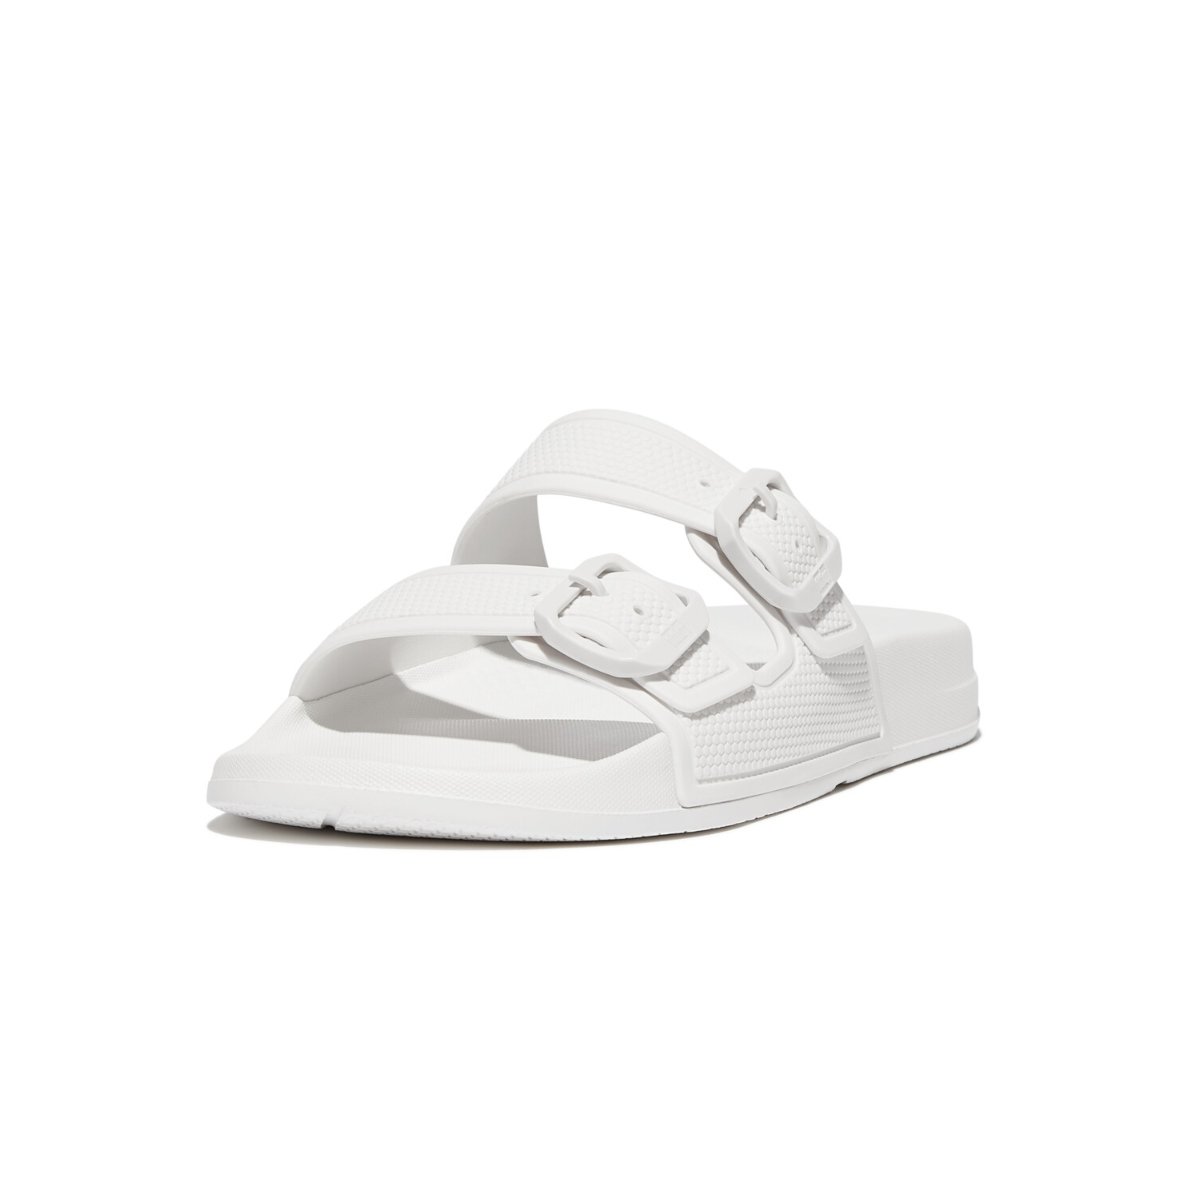 FitFlop iQUSHION Two-Bar Buckle Slides Urban White side view